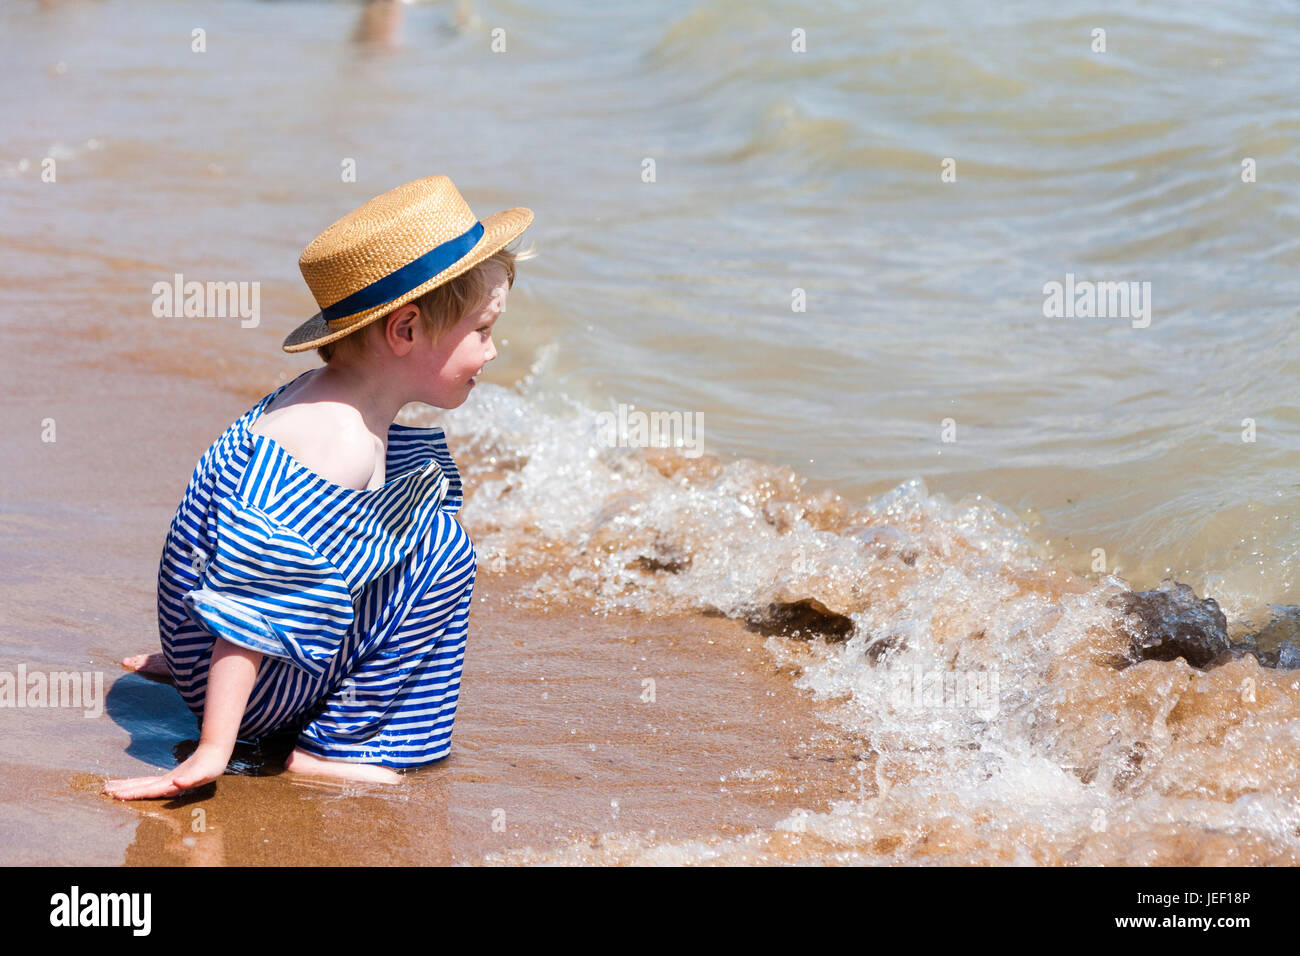 Caucasian blonde child, boy, 4-5 years old, kneeling in the surf on a beach, wearing straw hat and blue and white Victorian beach costume. Stock Photo